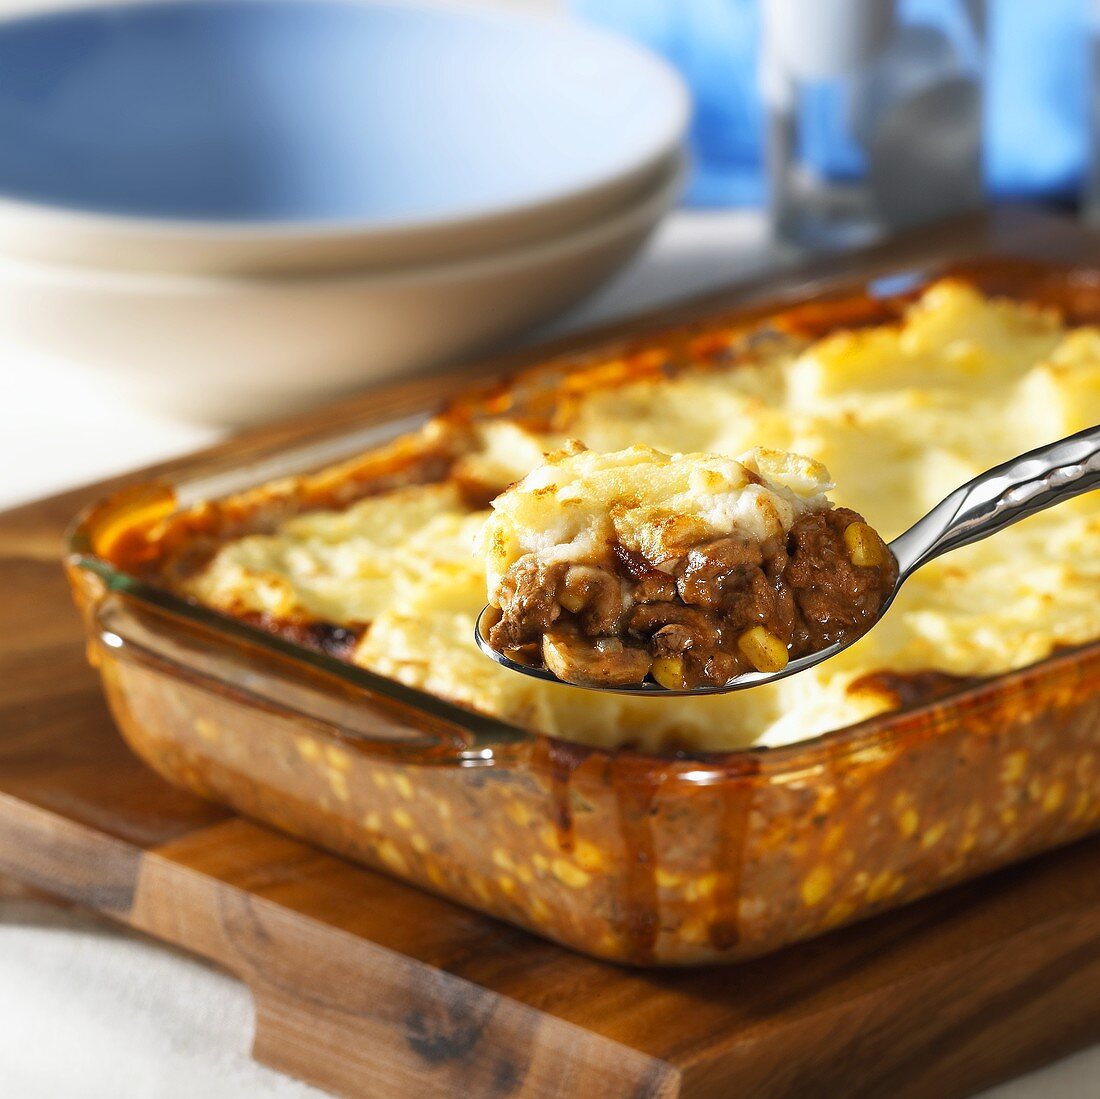 Shepherd's pie (Minced meat with mashed potato topping, England)